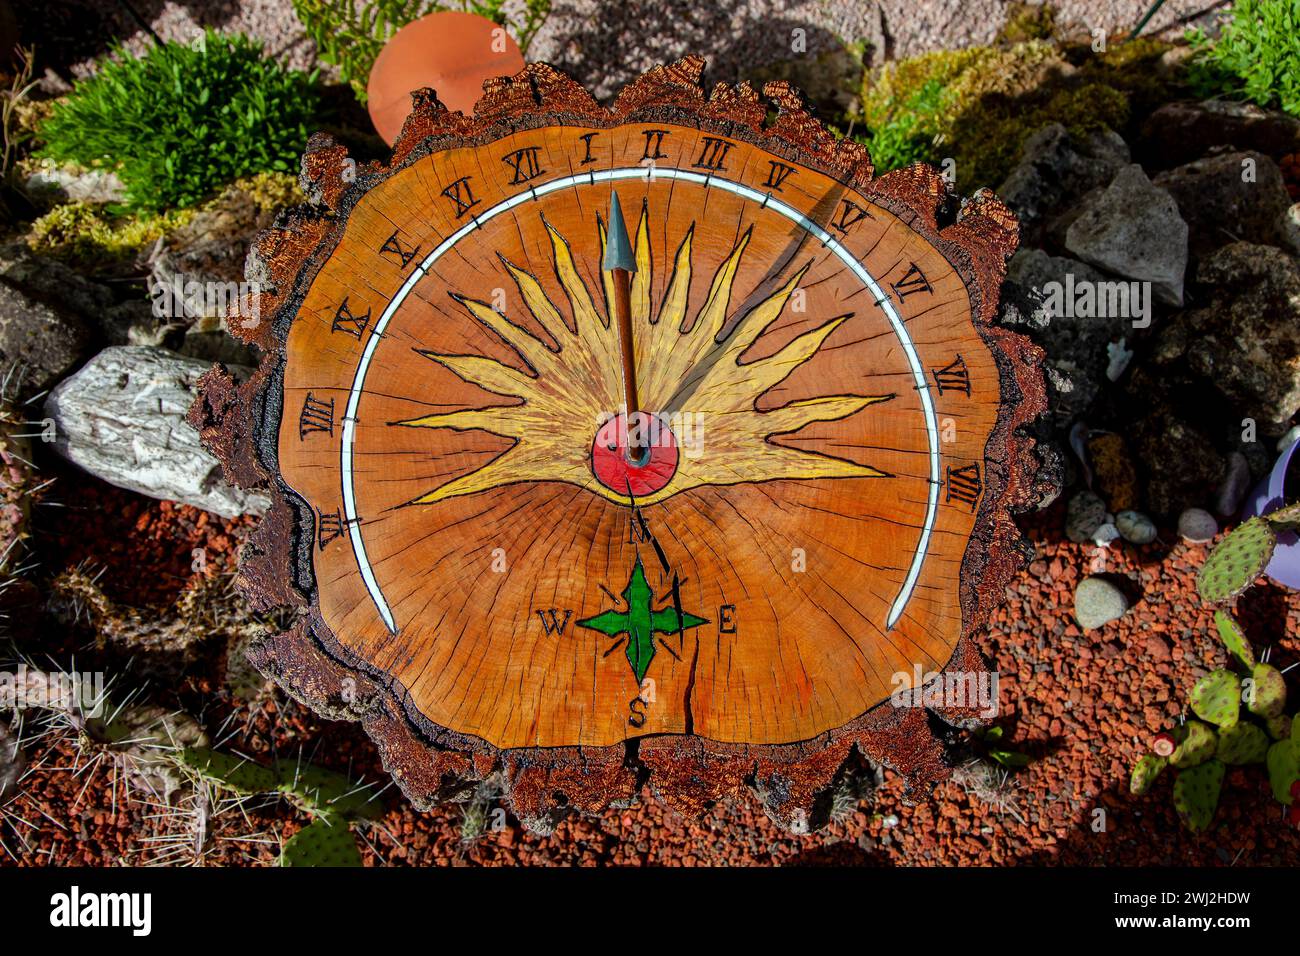 DIY Sundial made in the wood. Painted garden sundial. astronomical sun clock dial. cross section Stock Photo